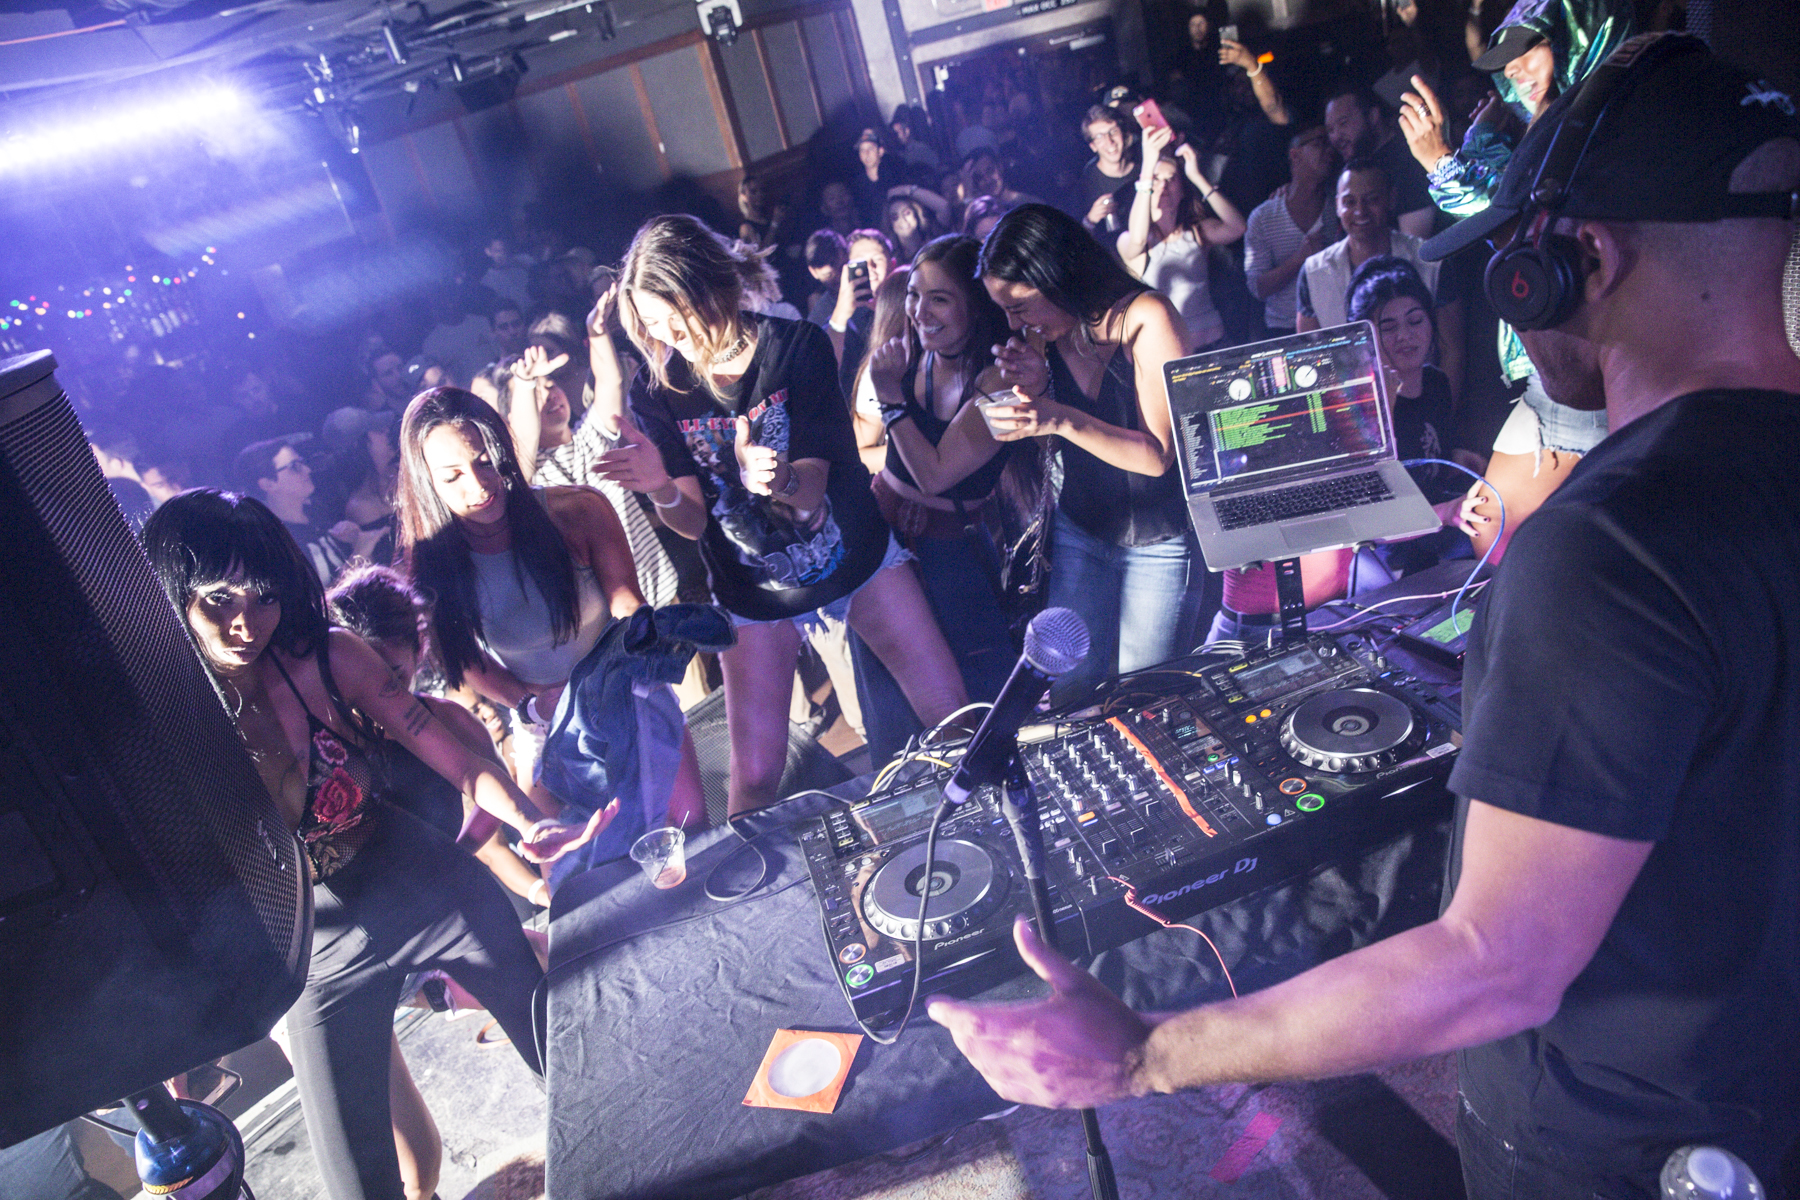 New Vegas: SPIN, AlunaGeorge, and Major Lazer's Walshy Fire Take Over Bunkhouse Saloon  